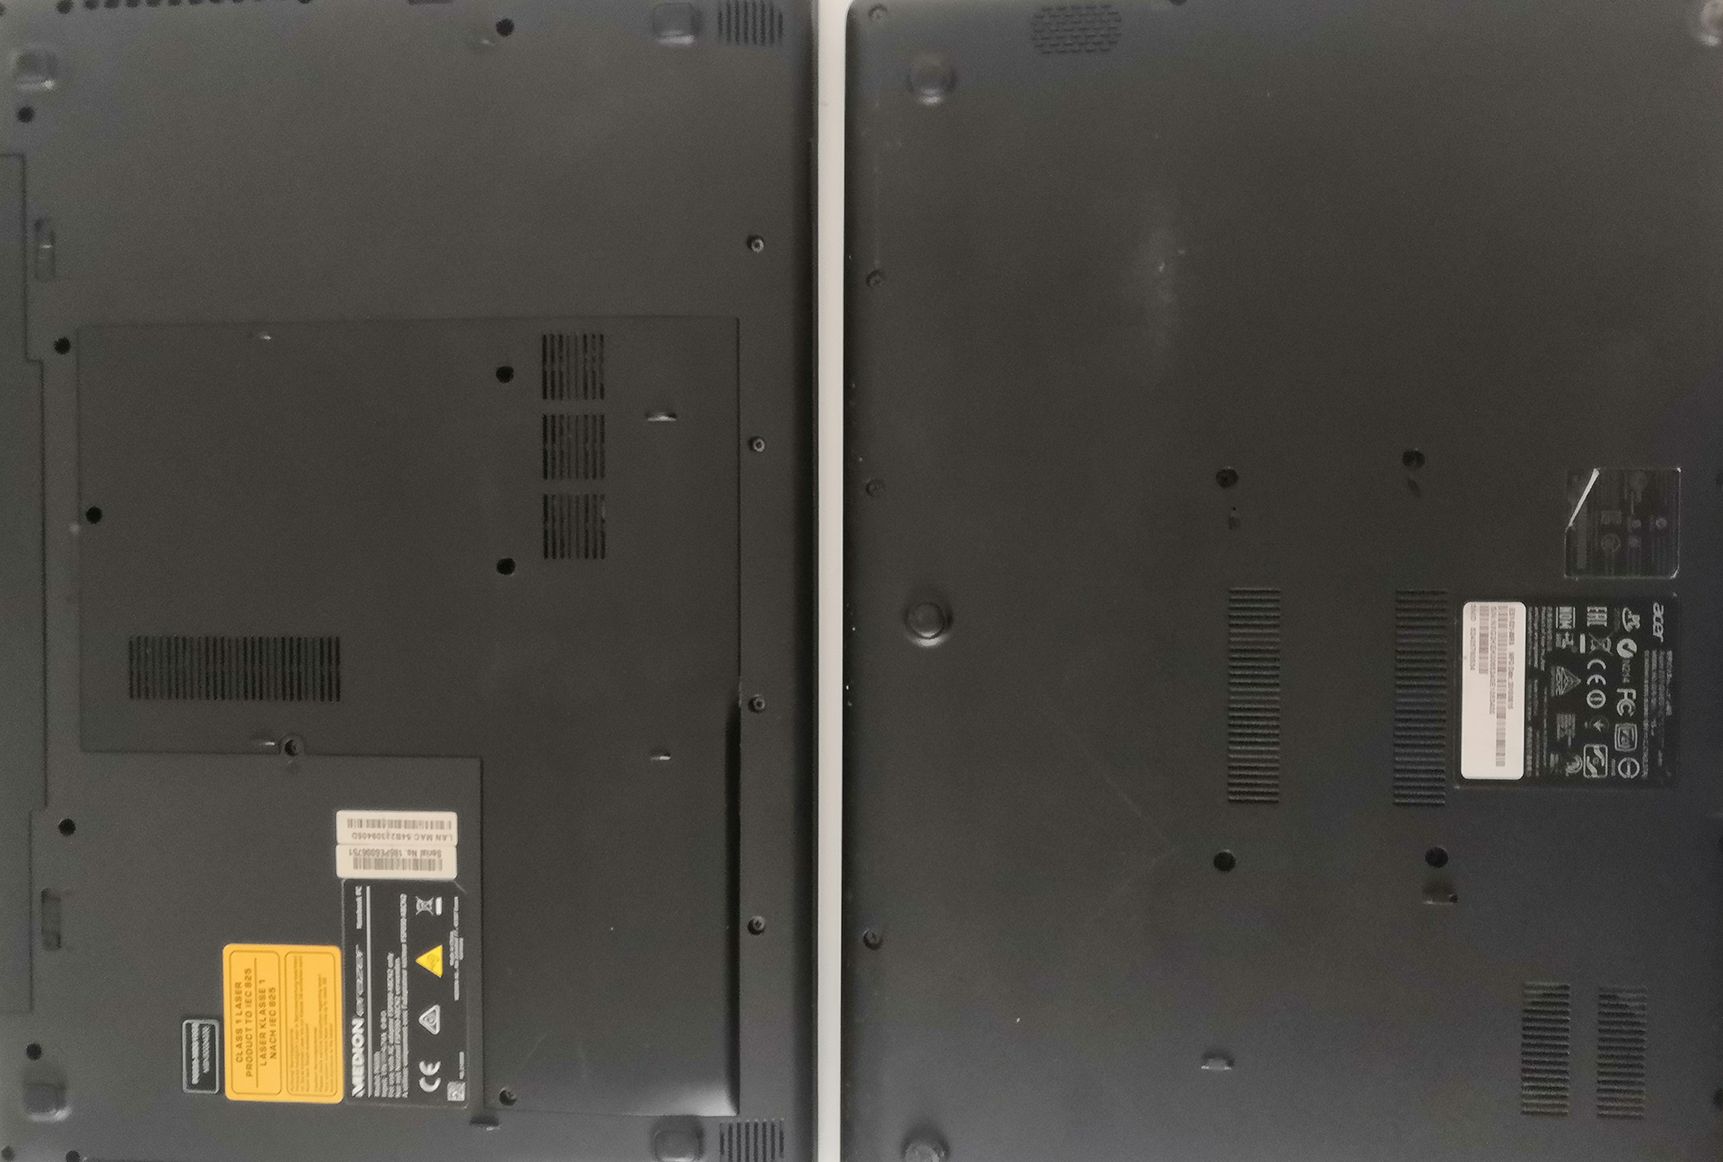 Two laptops with and without access panels